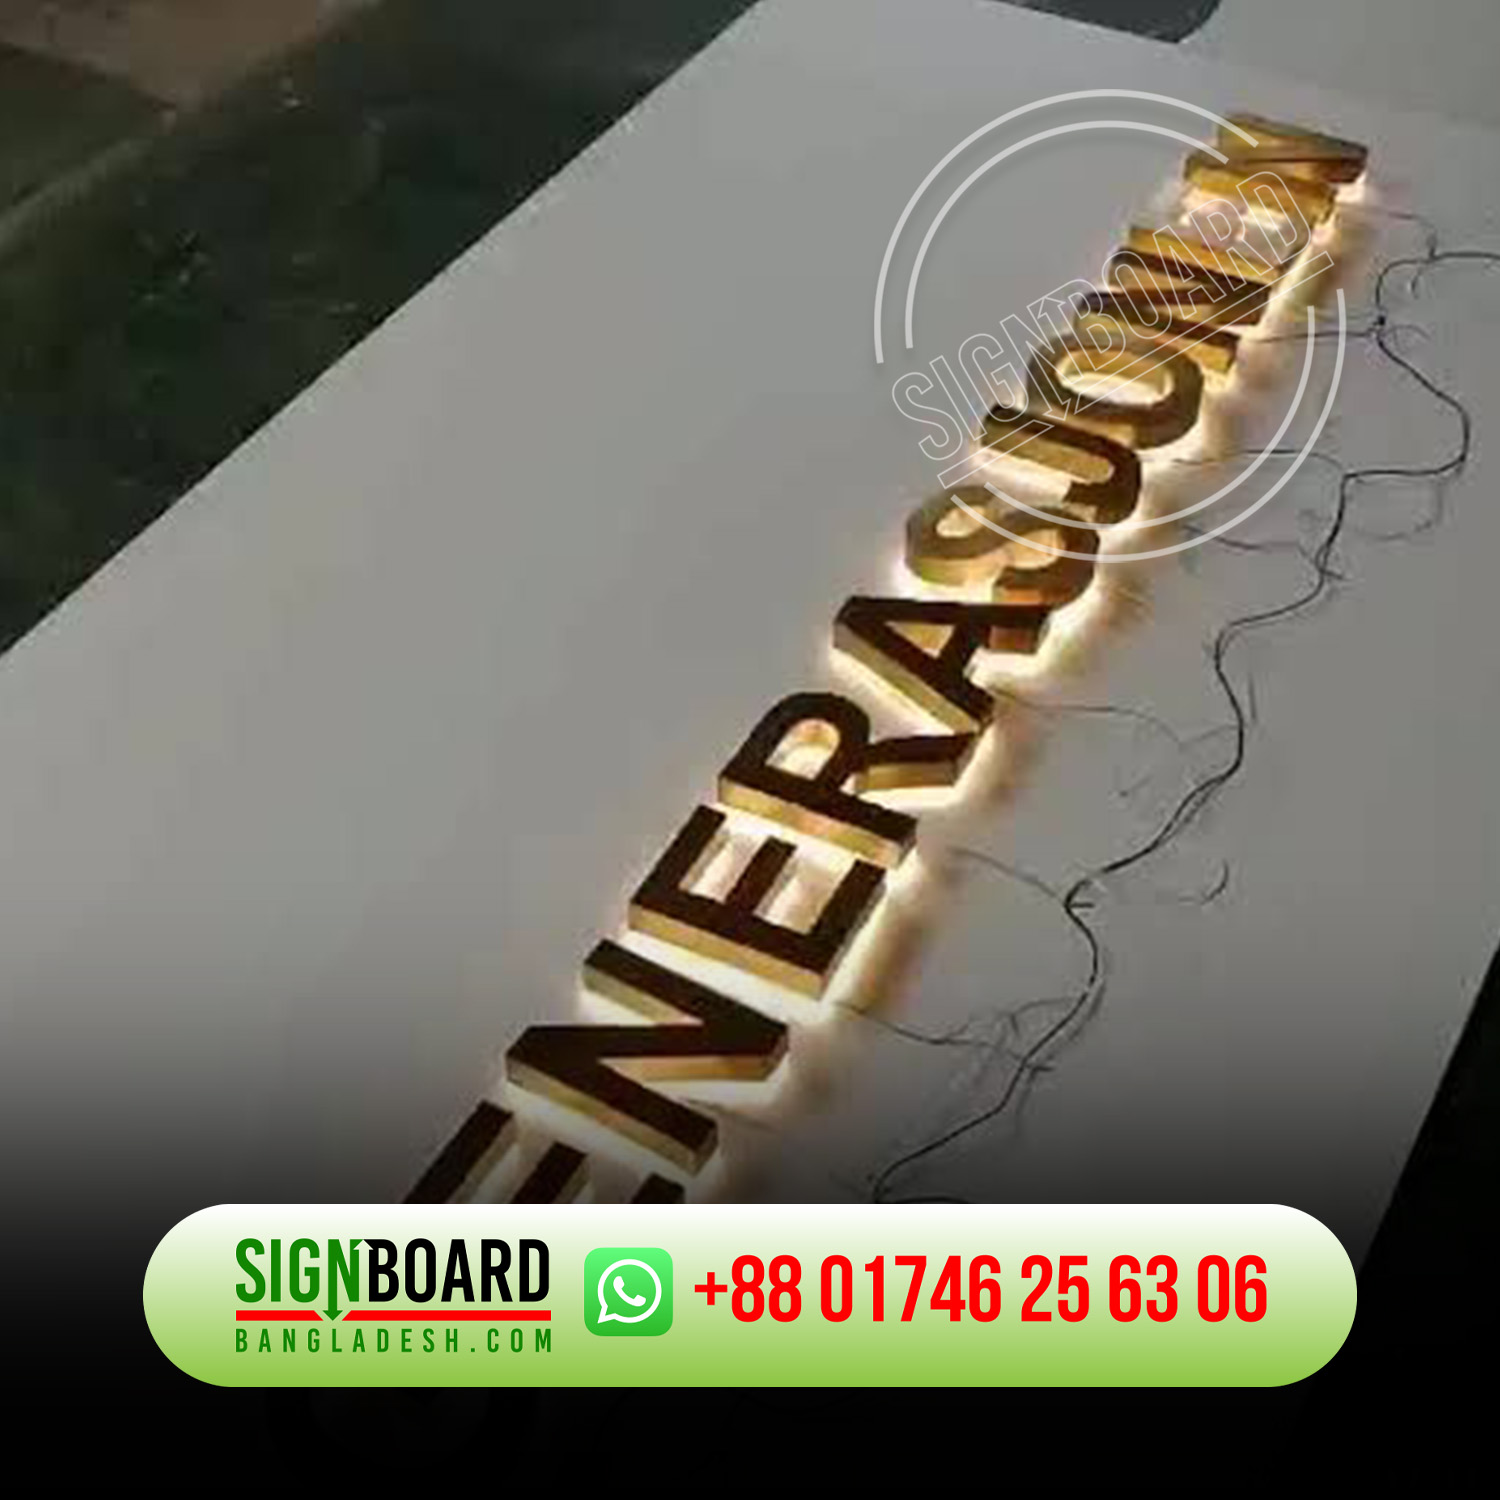 Acrylic letters Chittagong. LED SIGN BD. Name Plate Design BD - Nameplate SS Steel Channel Acrylic Signage BD. SS Golden and Silver Color Letter Signage BD. 3D LED Backlit Signs With Mirror Polished Gold Letter Signage. Golden Stainless Steel Lit Led Letters. Custom Golden Metal LED Backlit Sign Light Uo Letter. Gold Color Led Backlit Letter Sign. custom acrylic letters Bangladesh. Acrylic Letters Digital Sign Maker in Dhaka. White Color High Acrylic Letter LED Sign | Dhaka. LED Sign Acrylic Top Letter LED Light Box Acrylic Letters. Acp Board Acrylic Letter with LED Lighting Signboard.